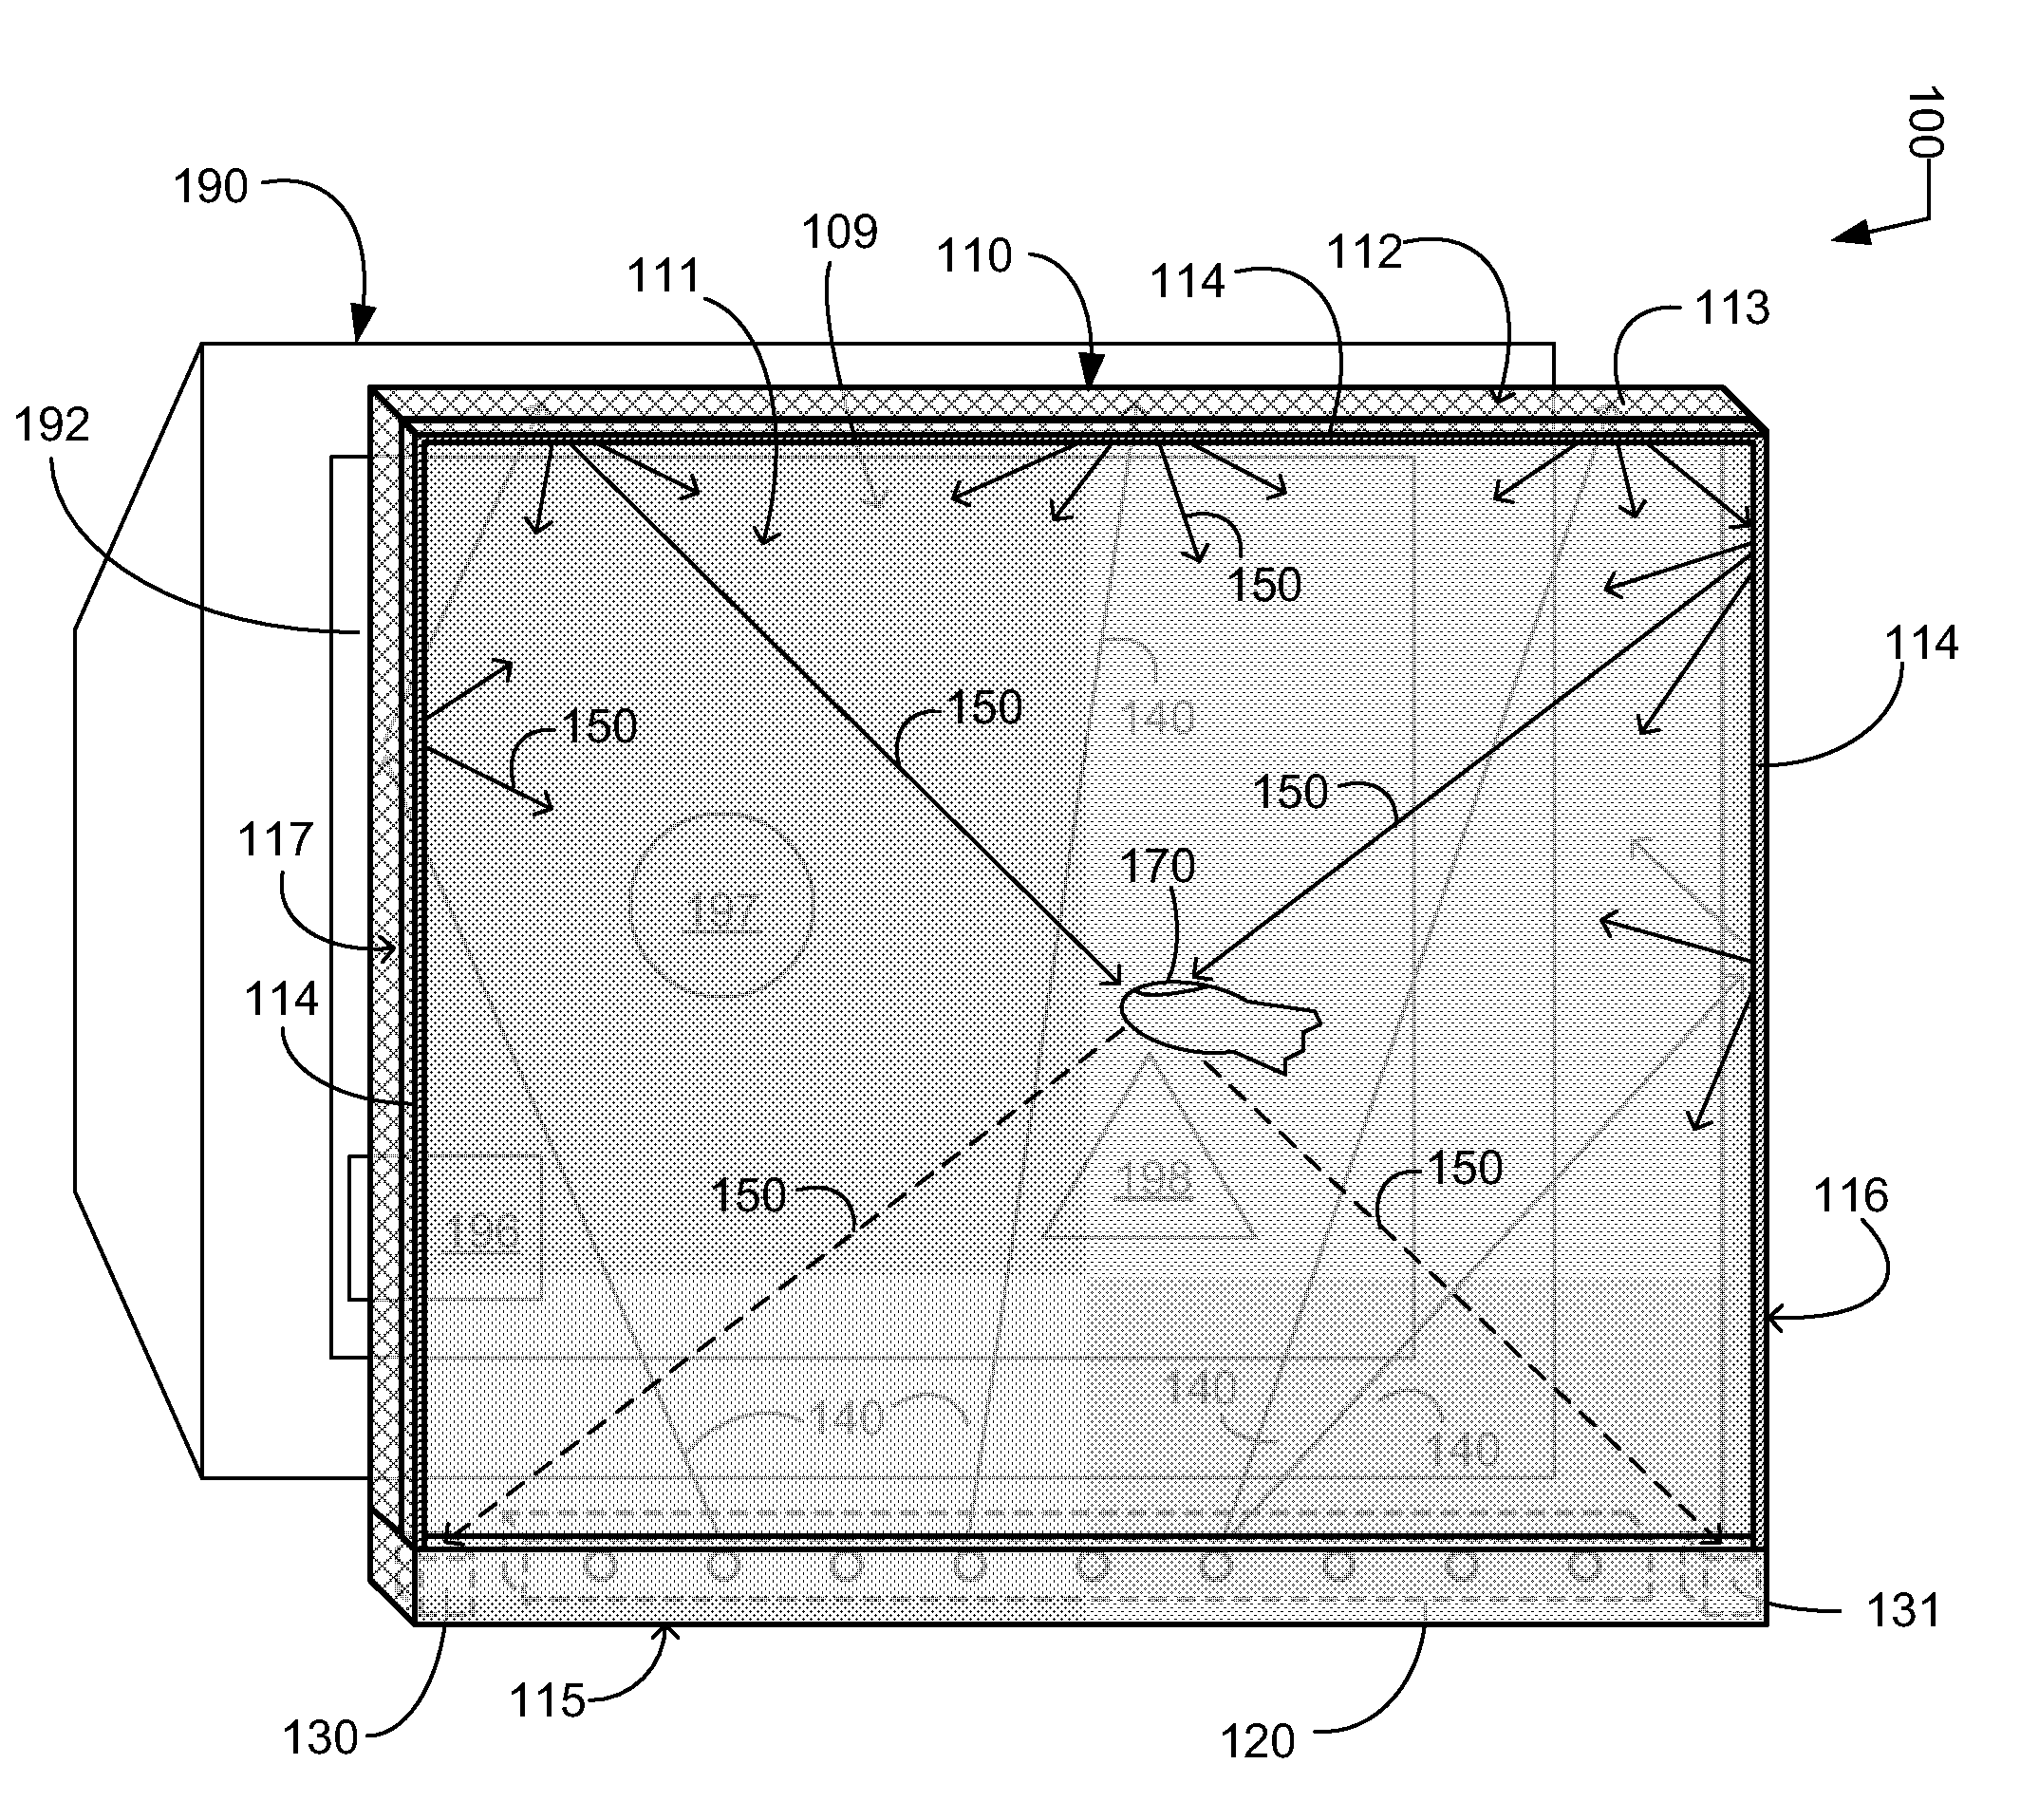 Touch Panel Display System with Illumination and Detection Provided from a Single Edge